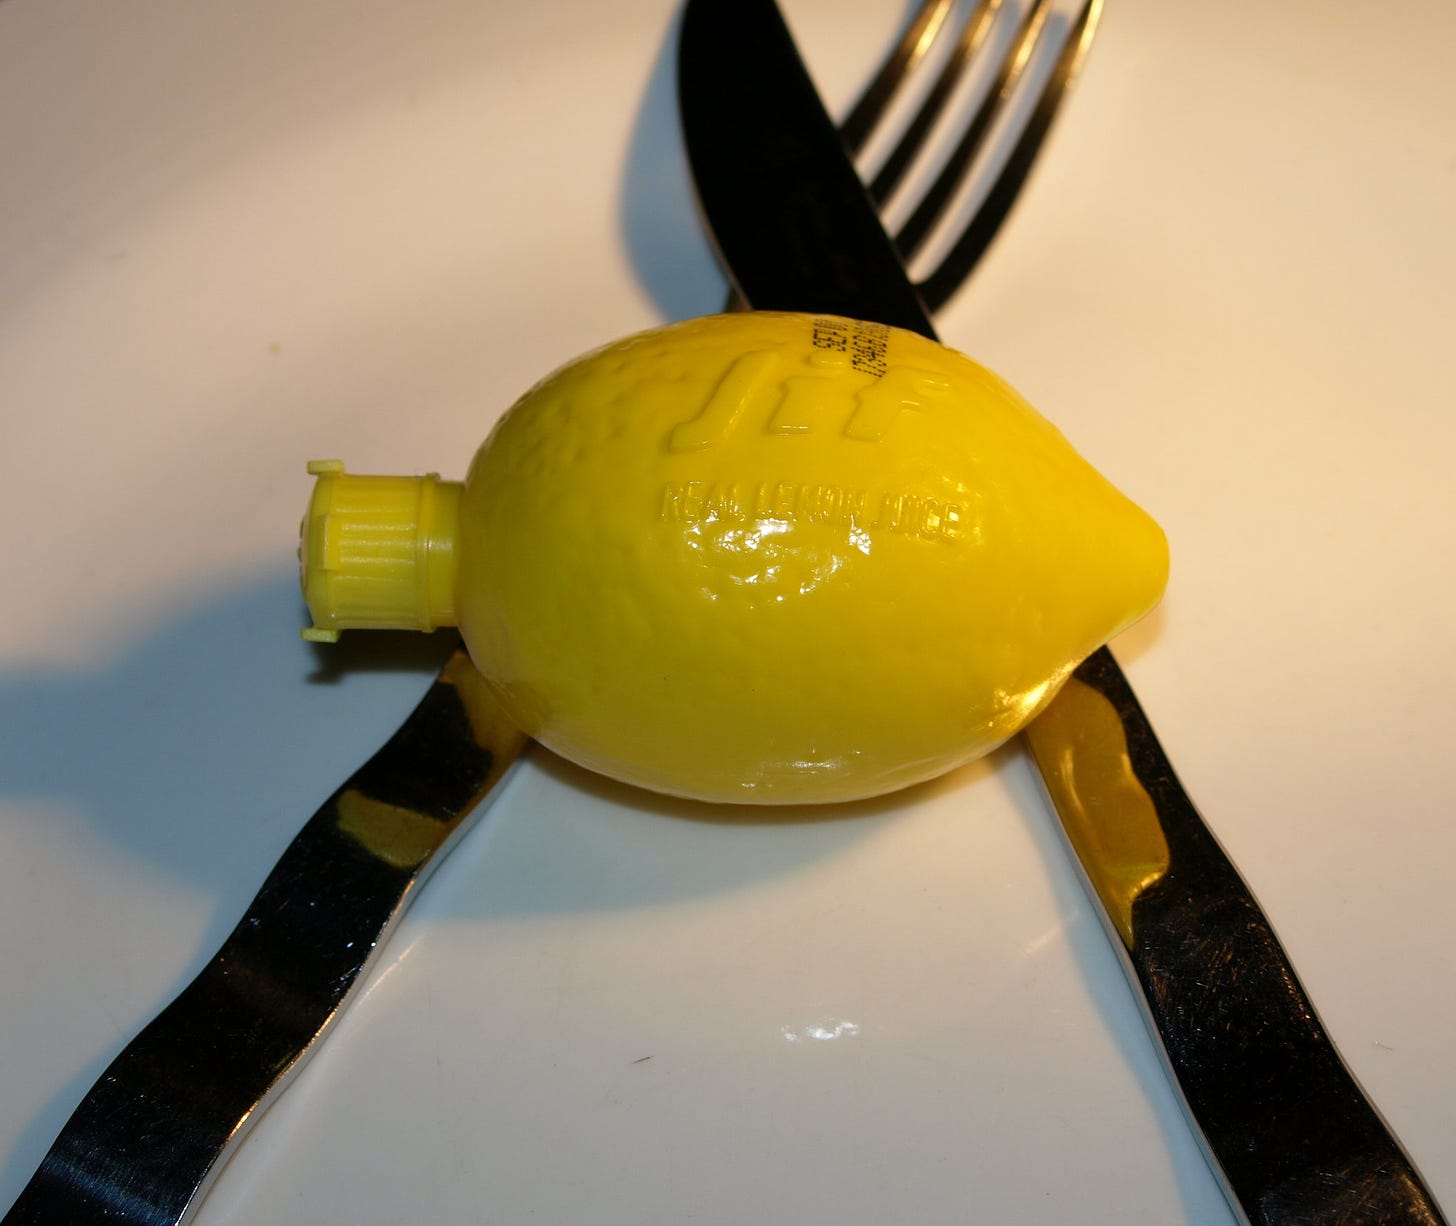 A plastic lemon sitting on a plate on top of silverware